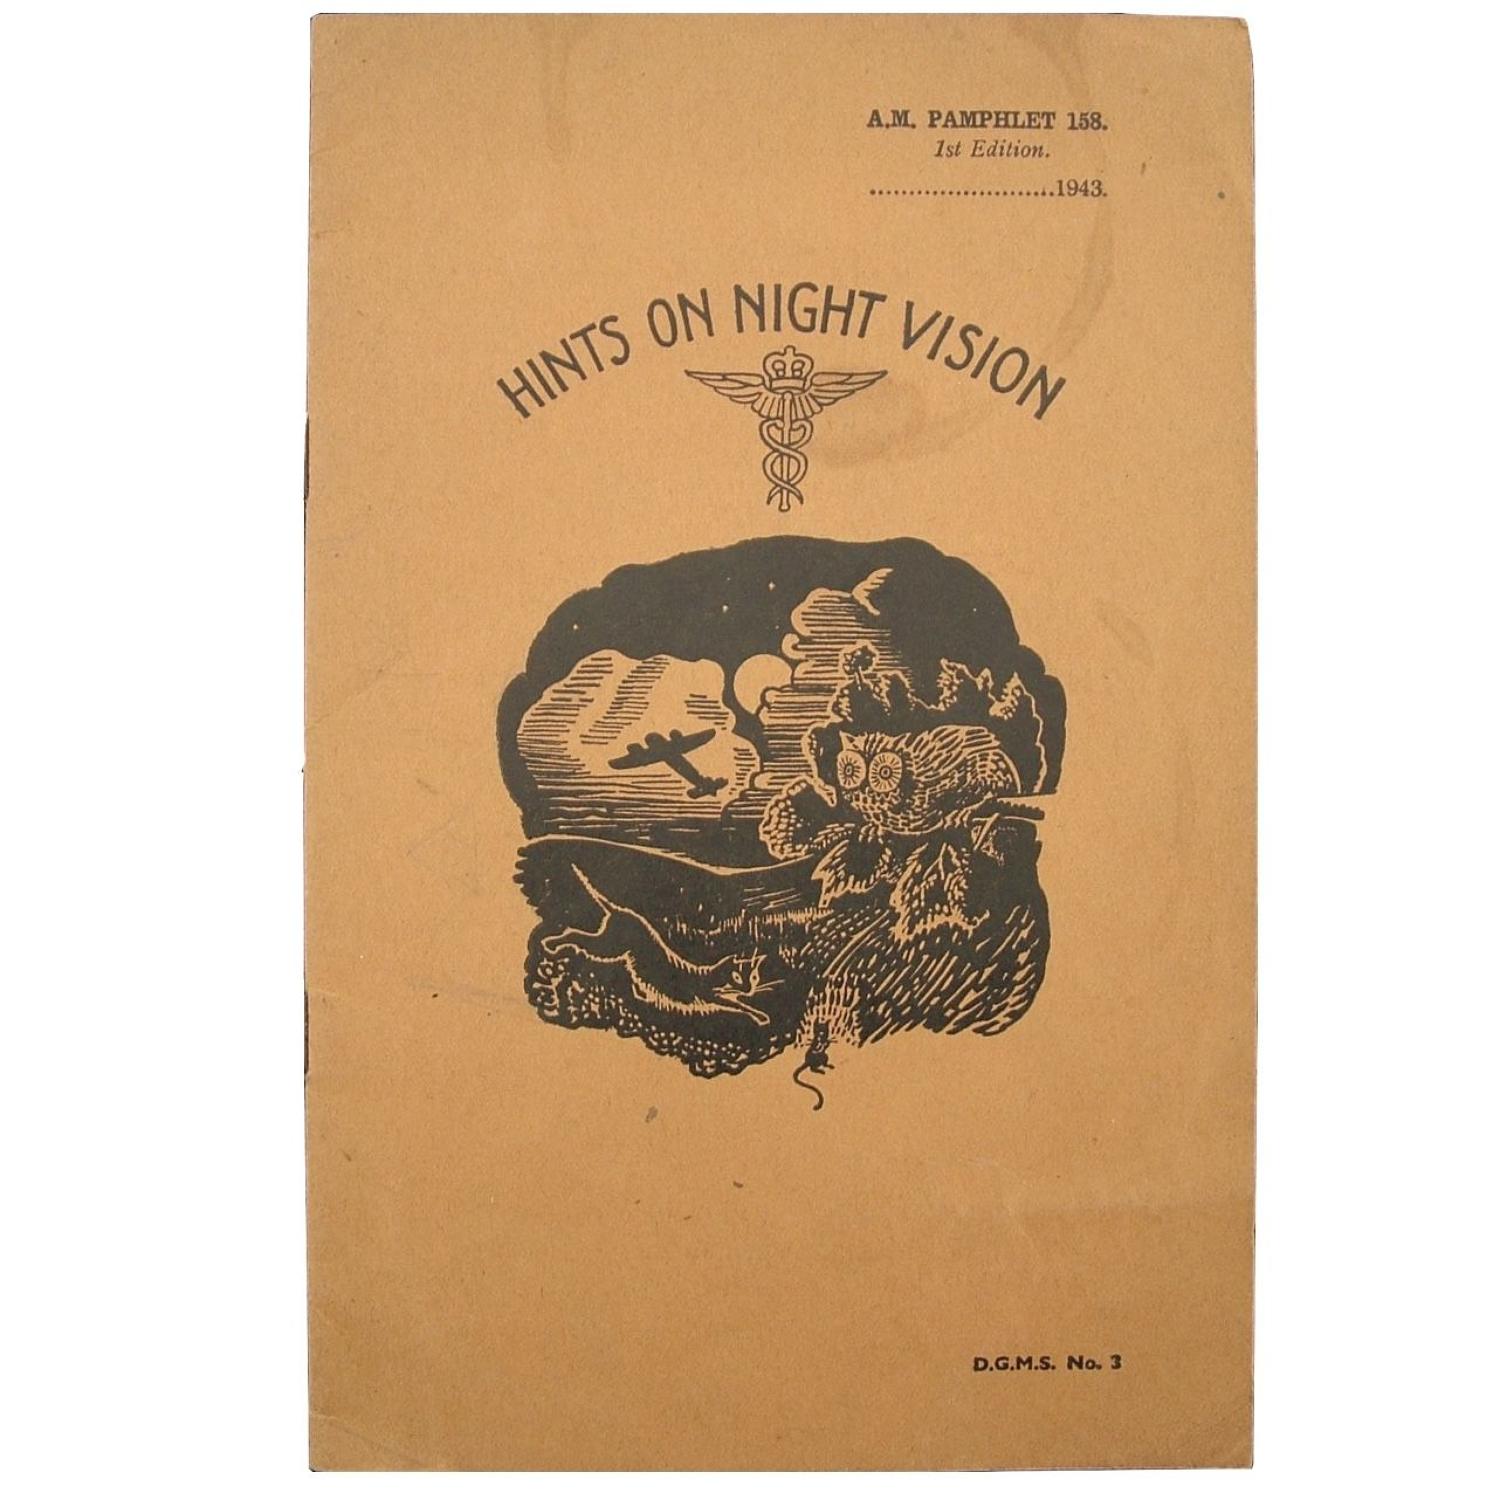 Air Ministry Pamphlet - Hints On Night Vision